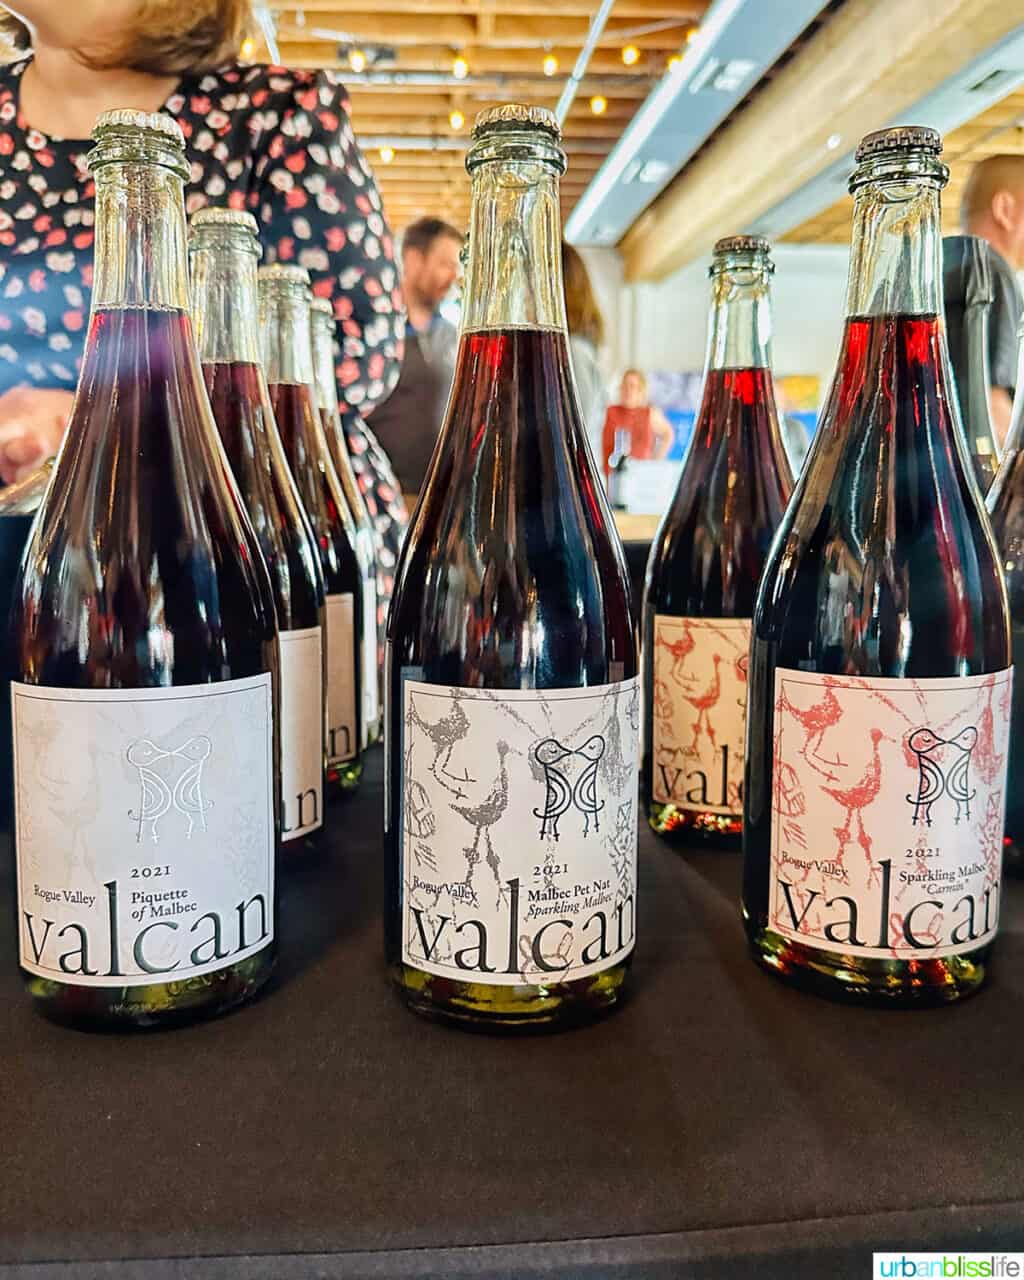 wine bottles of Valcan Cellars wines on a table.